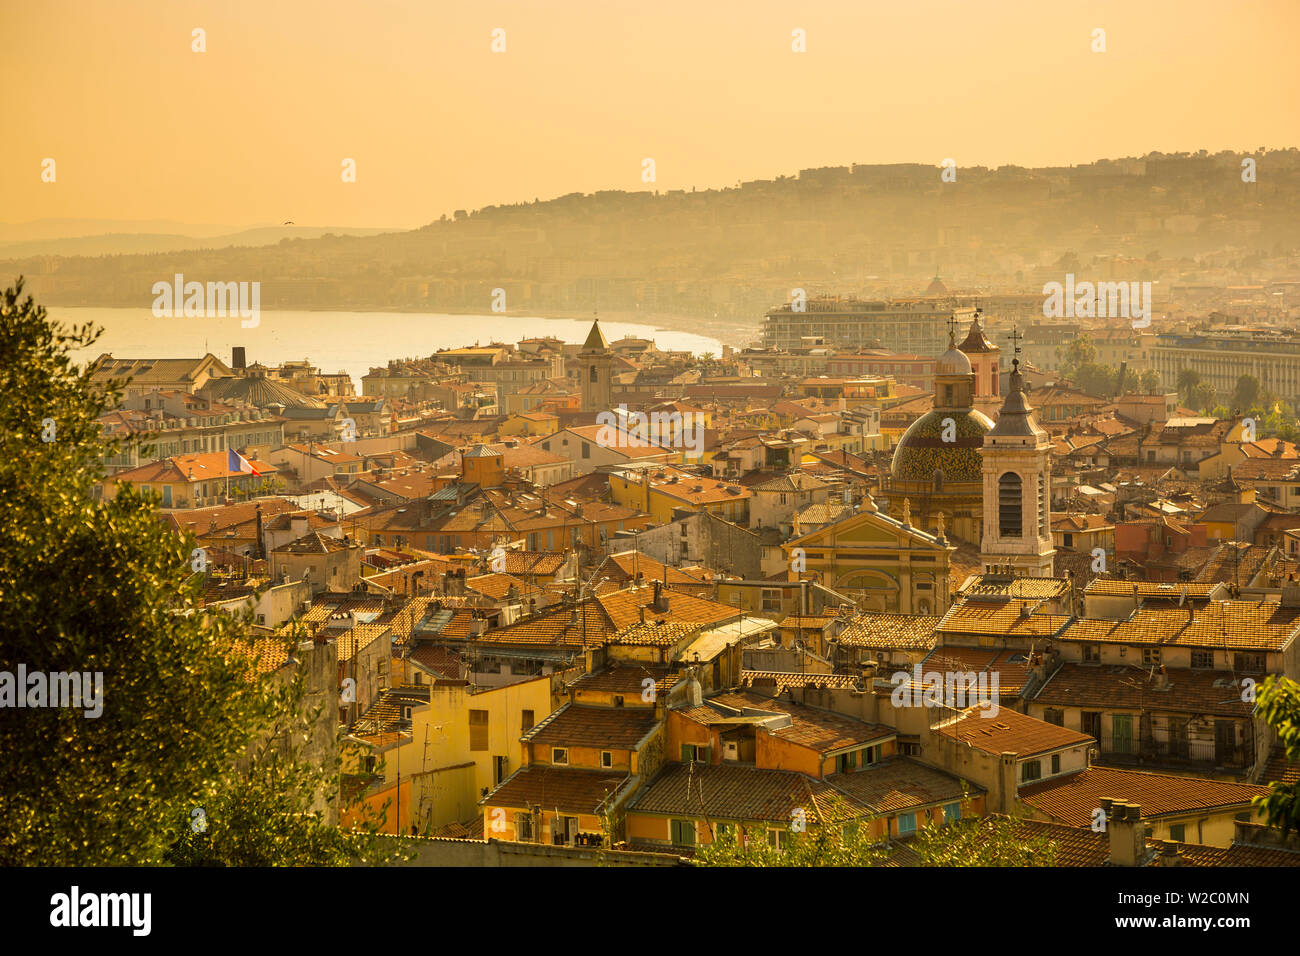 Old Town (Vieille Ville), Nice, Alpes-Maritimes, Provence-Alpes-Cote D'Azur, French Riviera, France Stock Photo